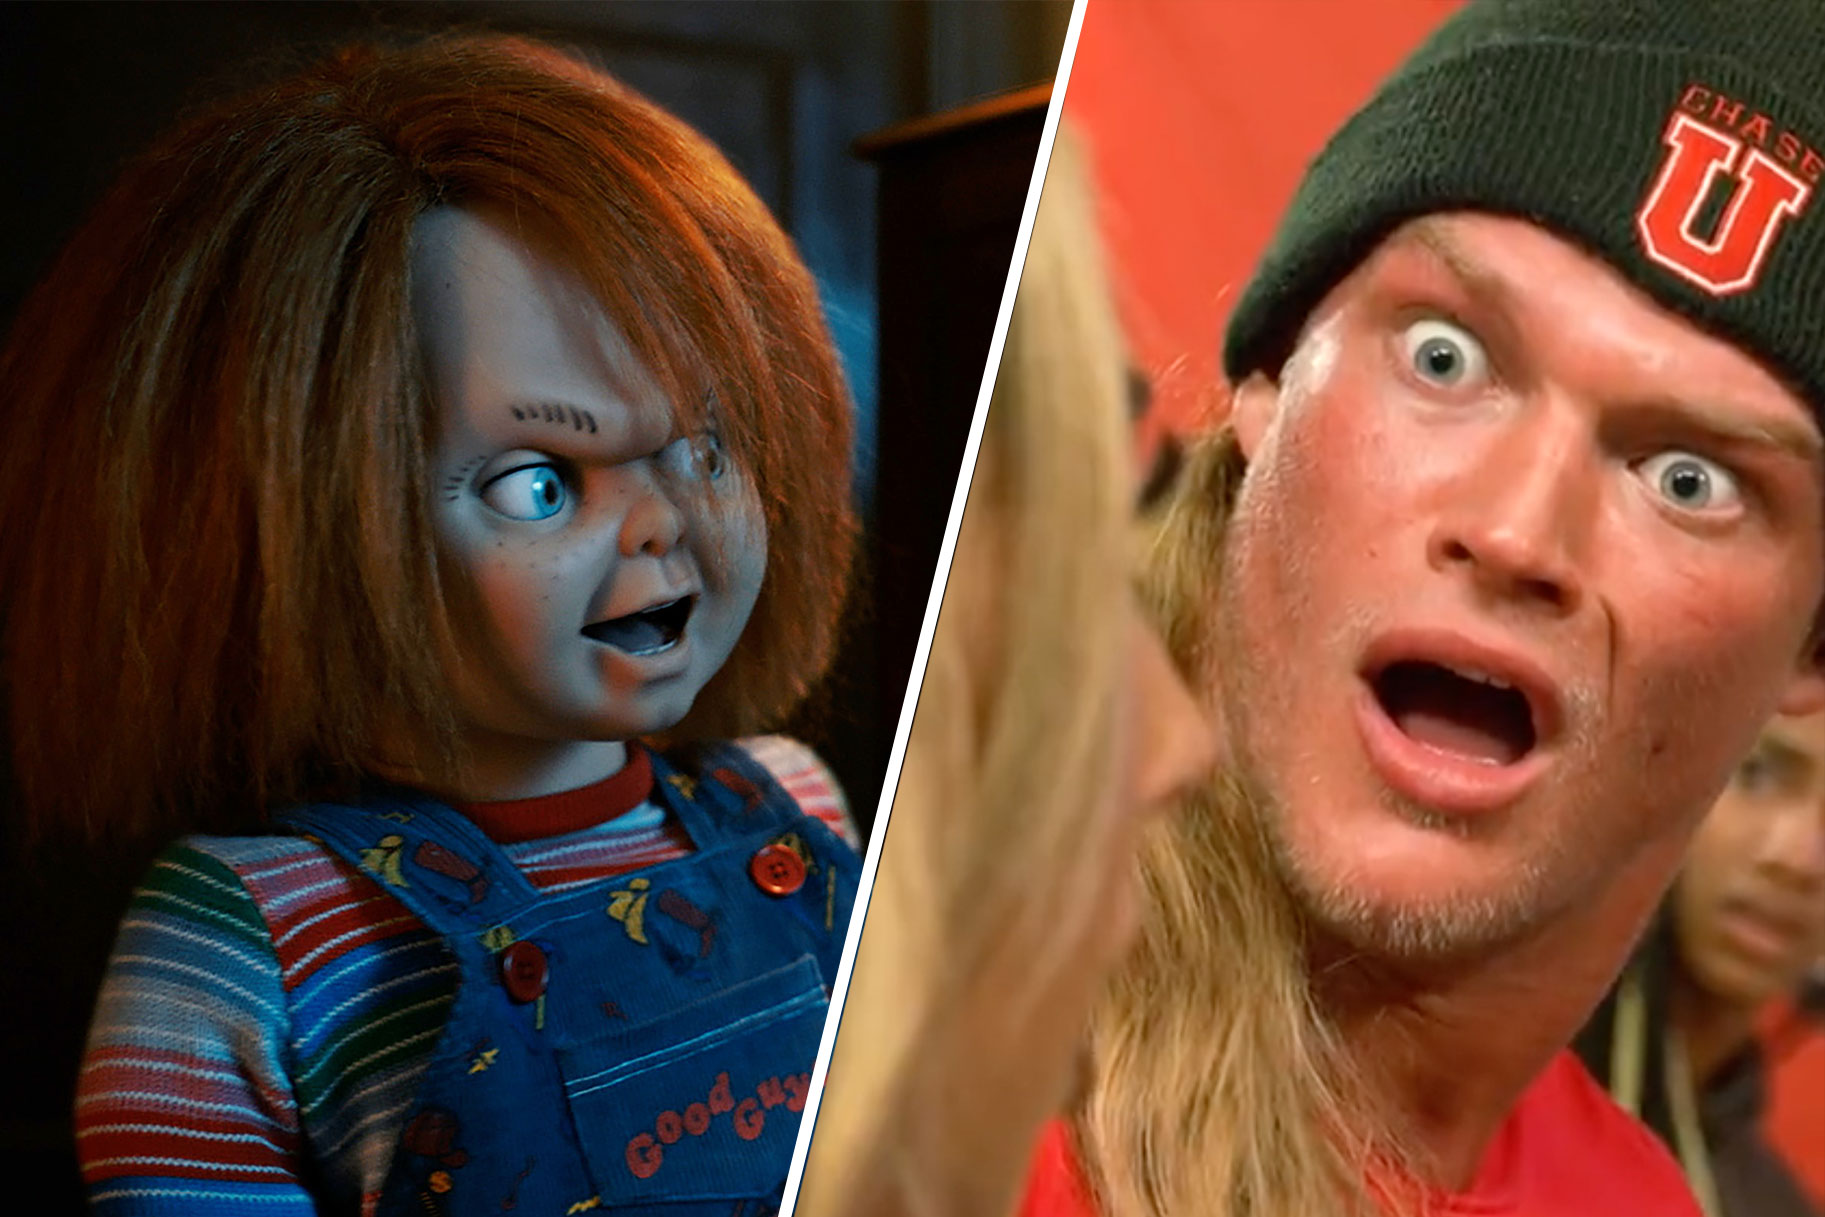 Split image of Chucky and NXT wrestler